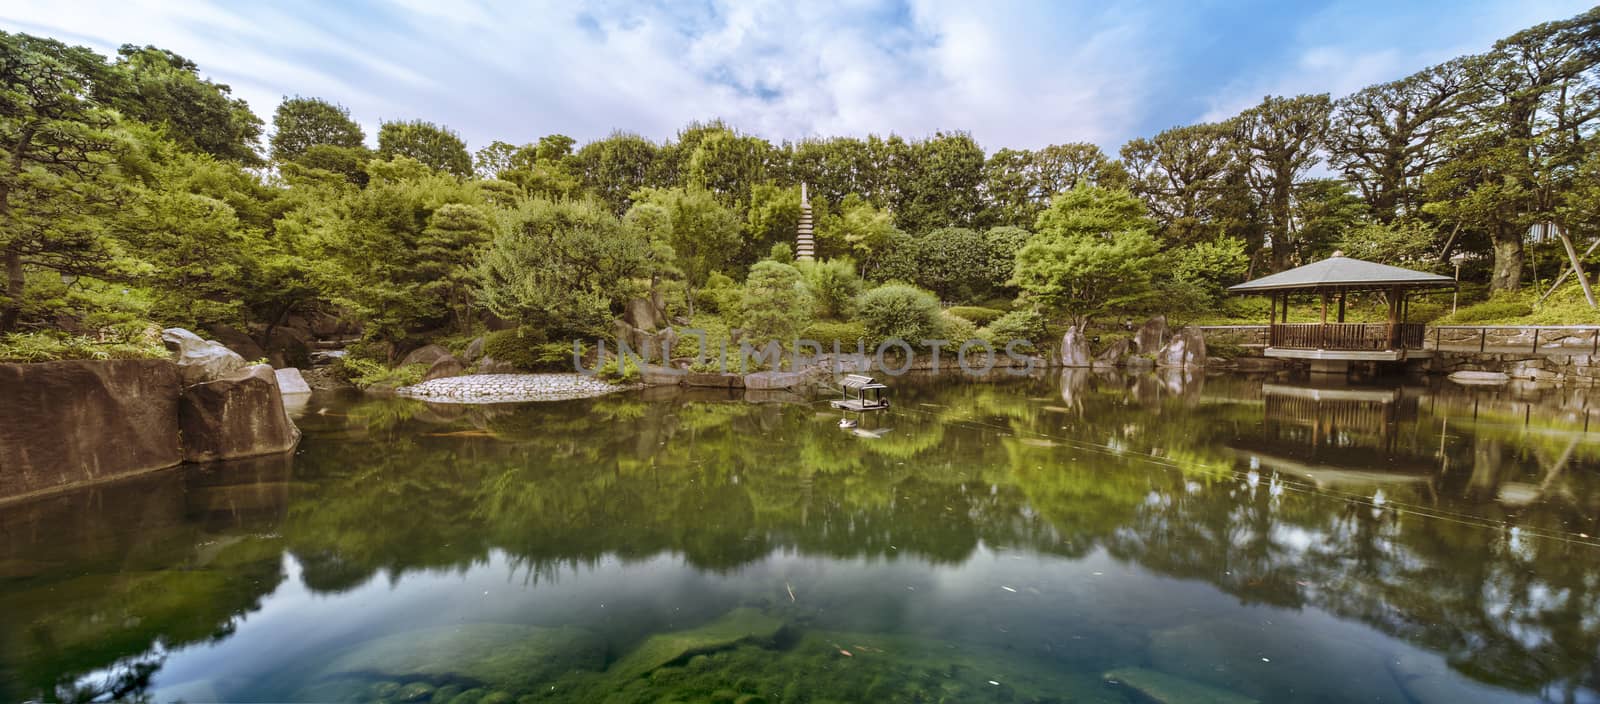 Central pond of Mejiro Garden which is surrounded by large flat stones by kuremo